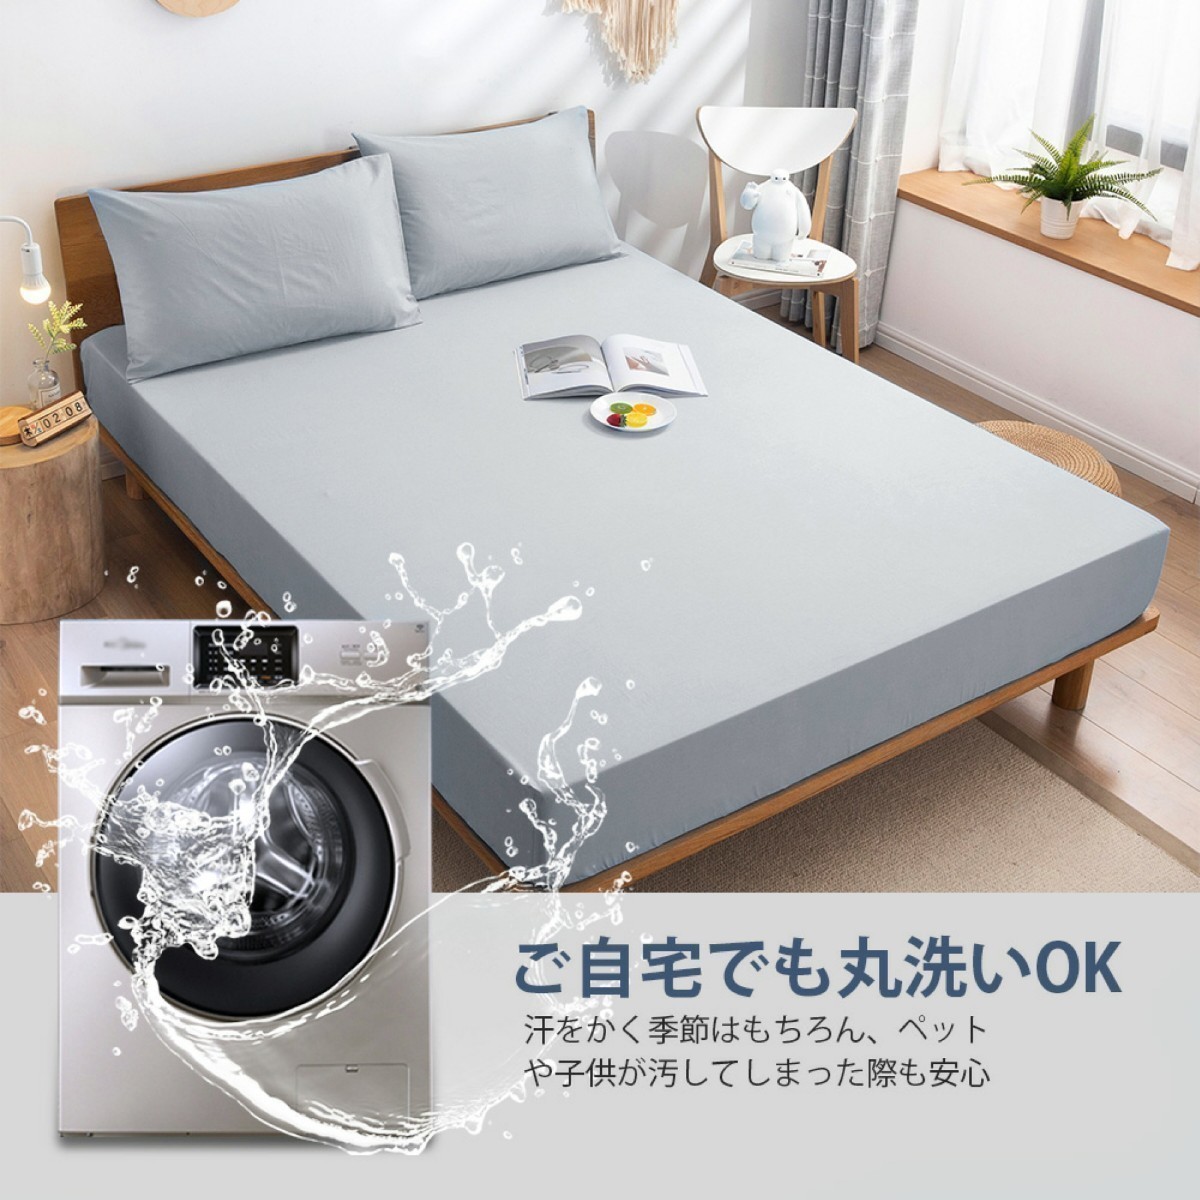  futon cover Queen 4 point set bedding cover set .. futon cover box sheet pillow cover western style * Japanese style combined use winter summer combined use white 